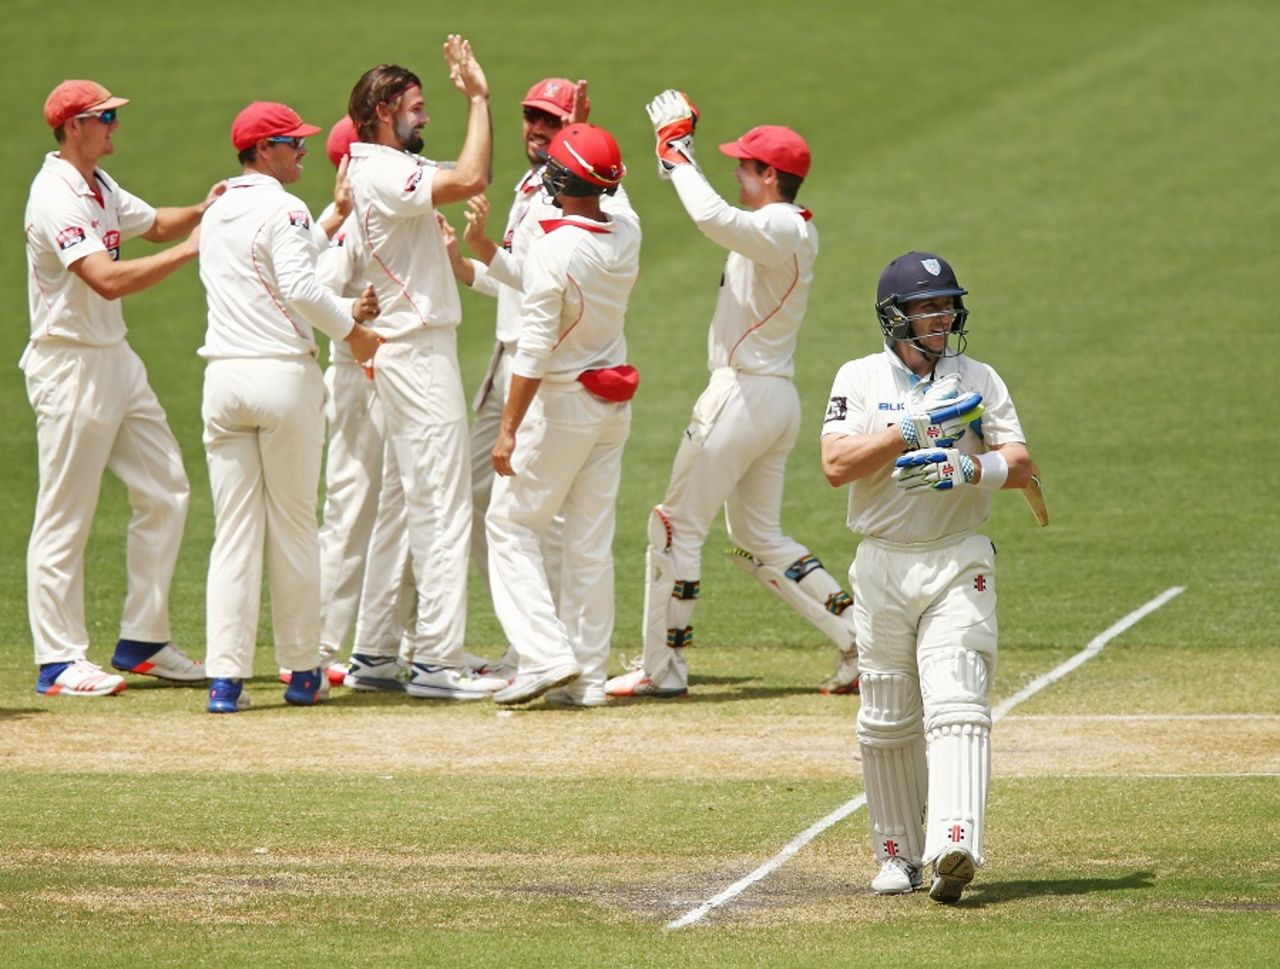 Peter Nevill was pinned lbw by Kane Richardson for 1, South Australia v New South Wales, 3rd day, Sheffield Shield 2016-17, Adelaide, December 7, 2016 